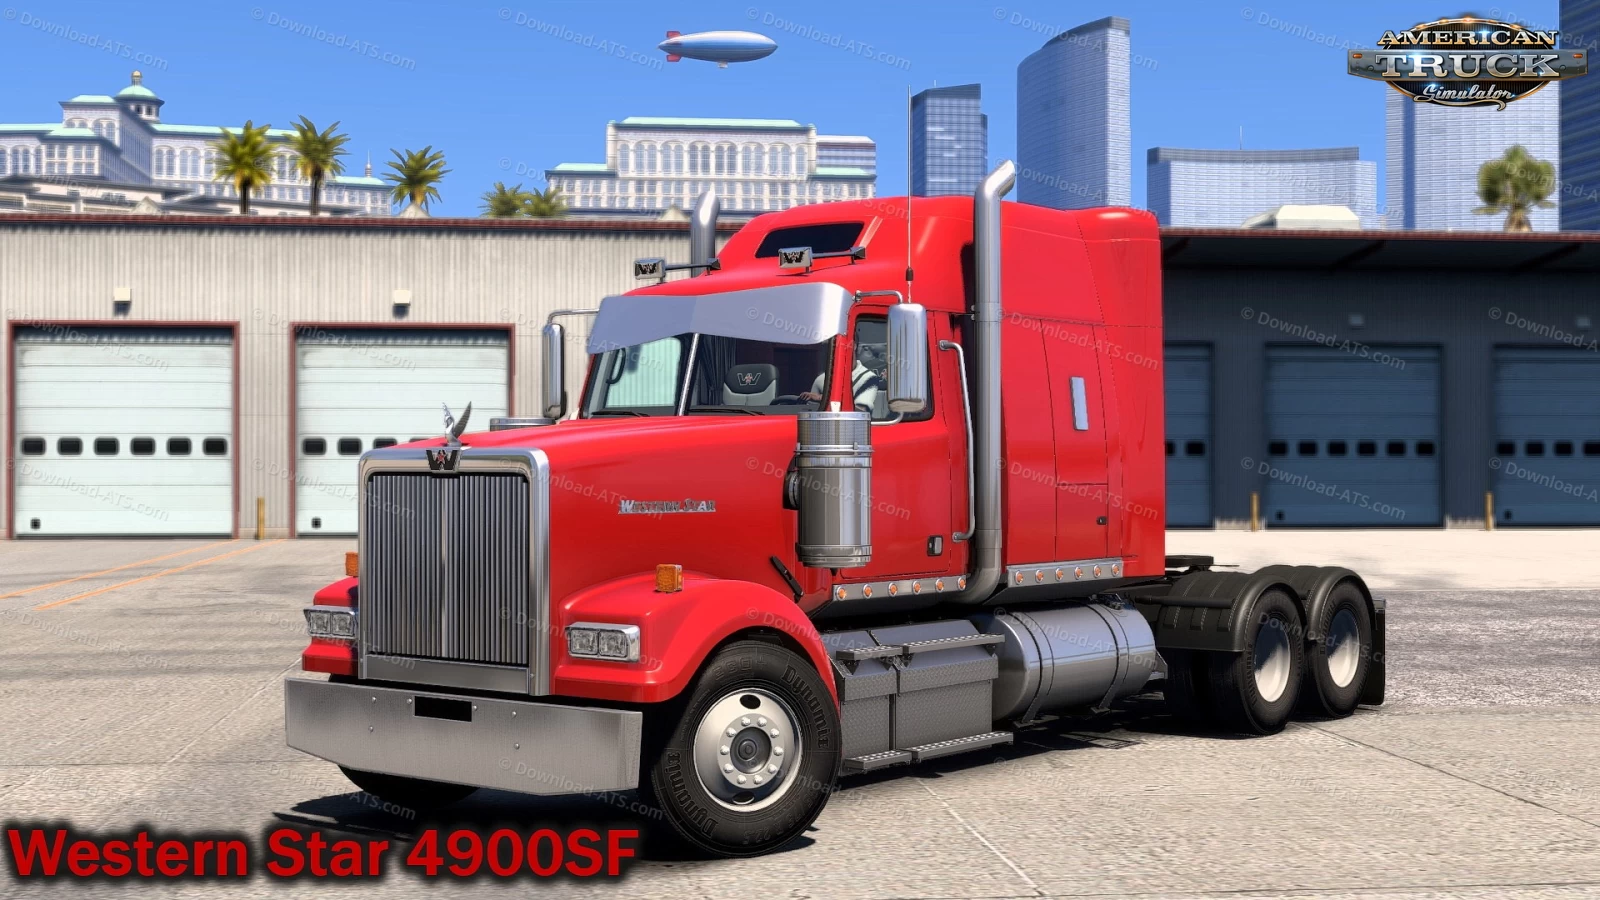 Western Star 4900SF Truck + Interior v1.1 (1.49.x) for ATS